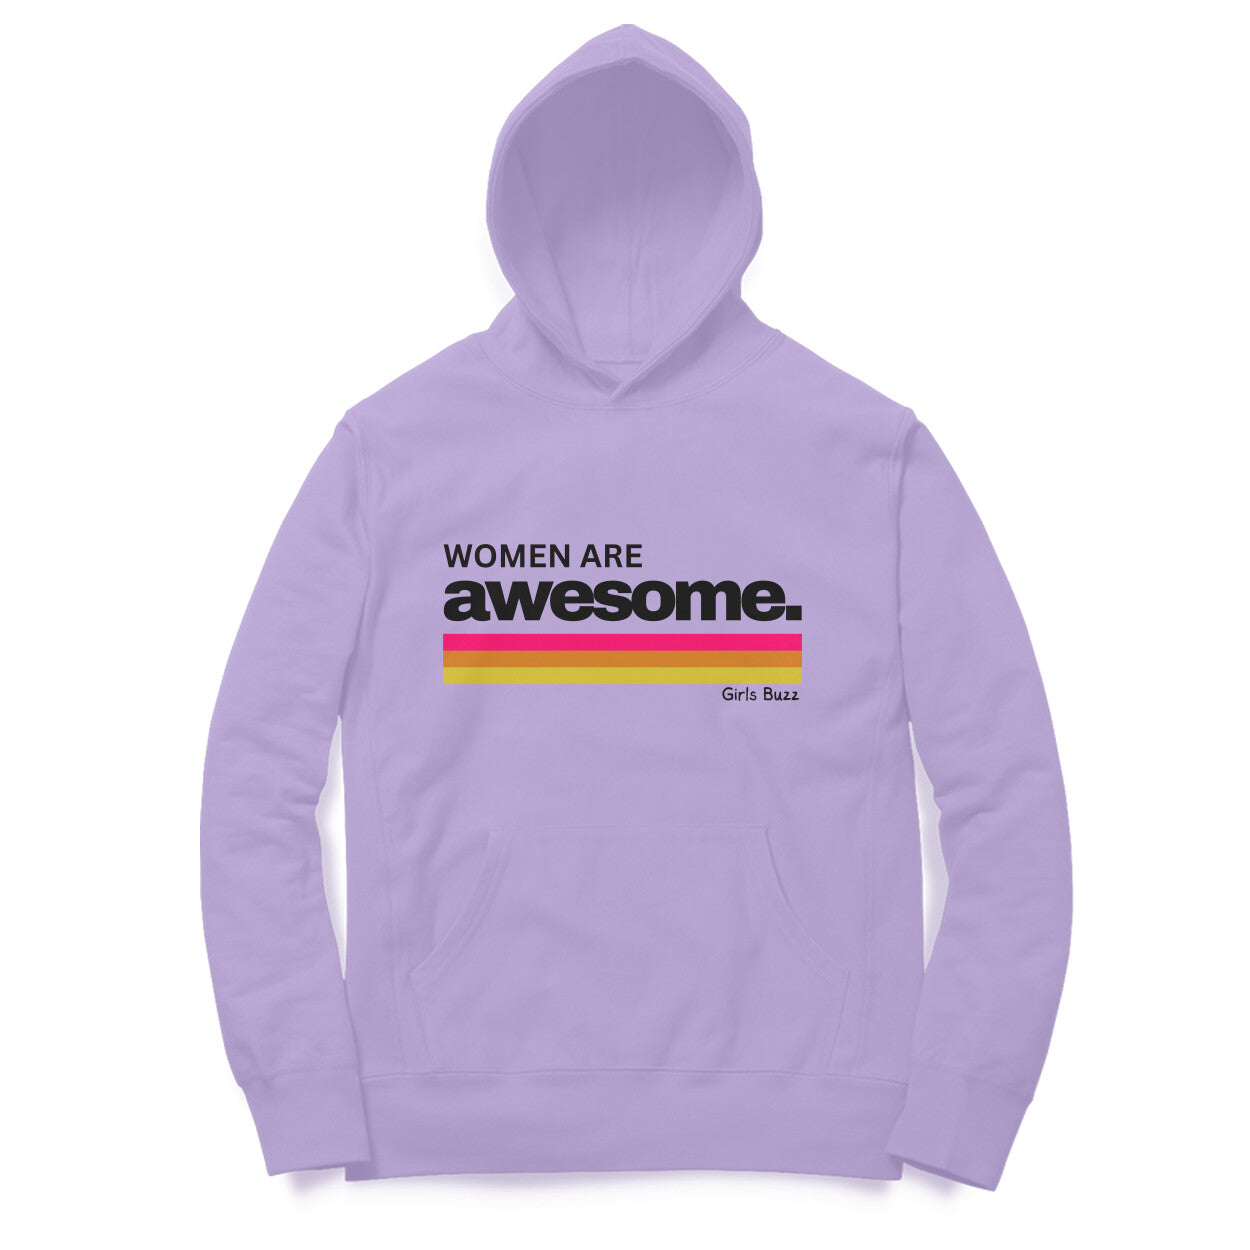 Women Are Awesome Hoodie